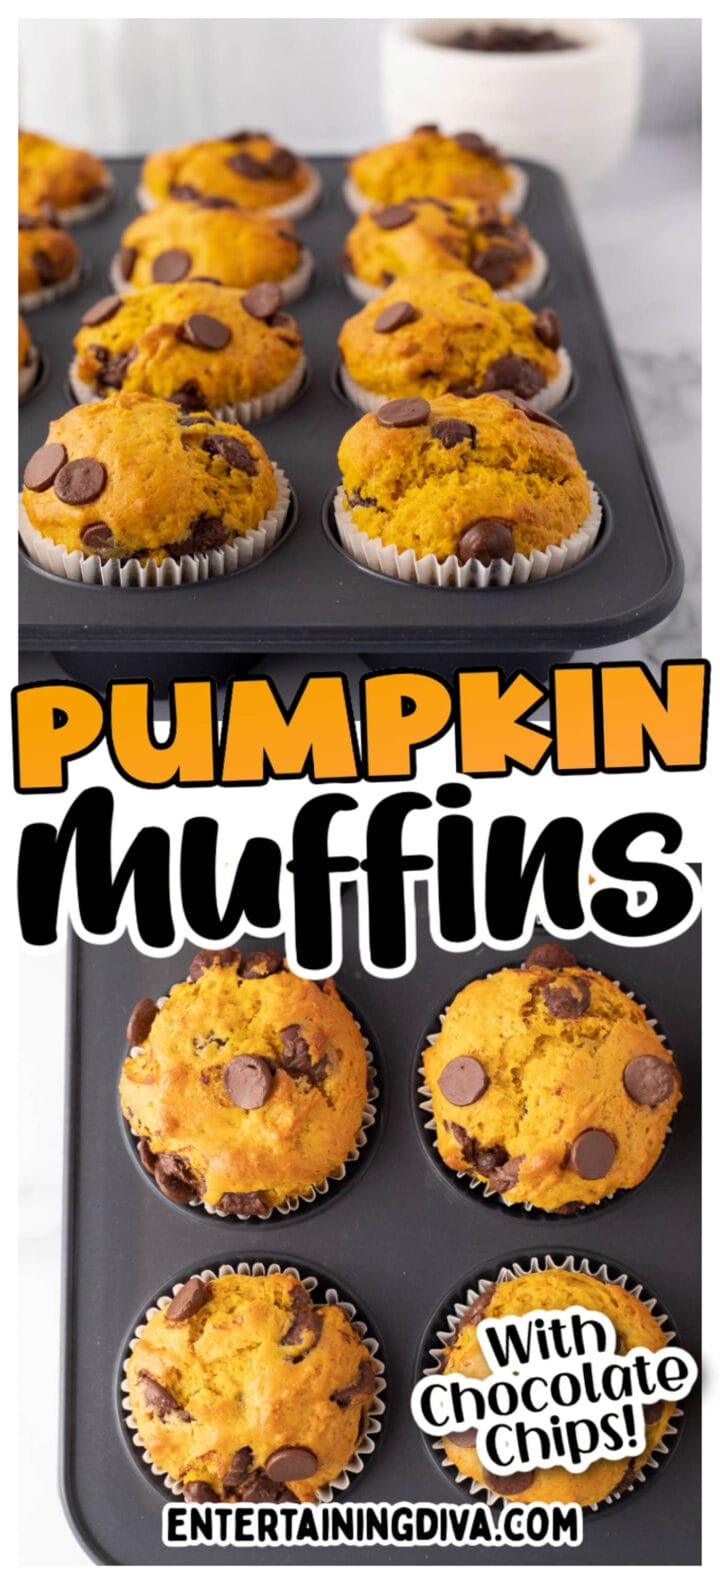 Pumpkin muffins with chocolate chips.